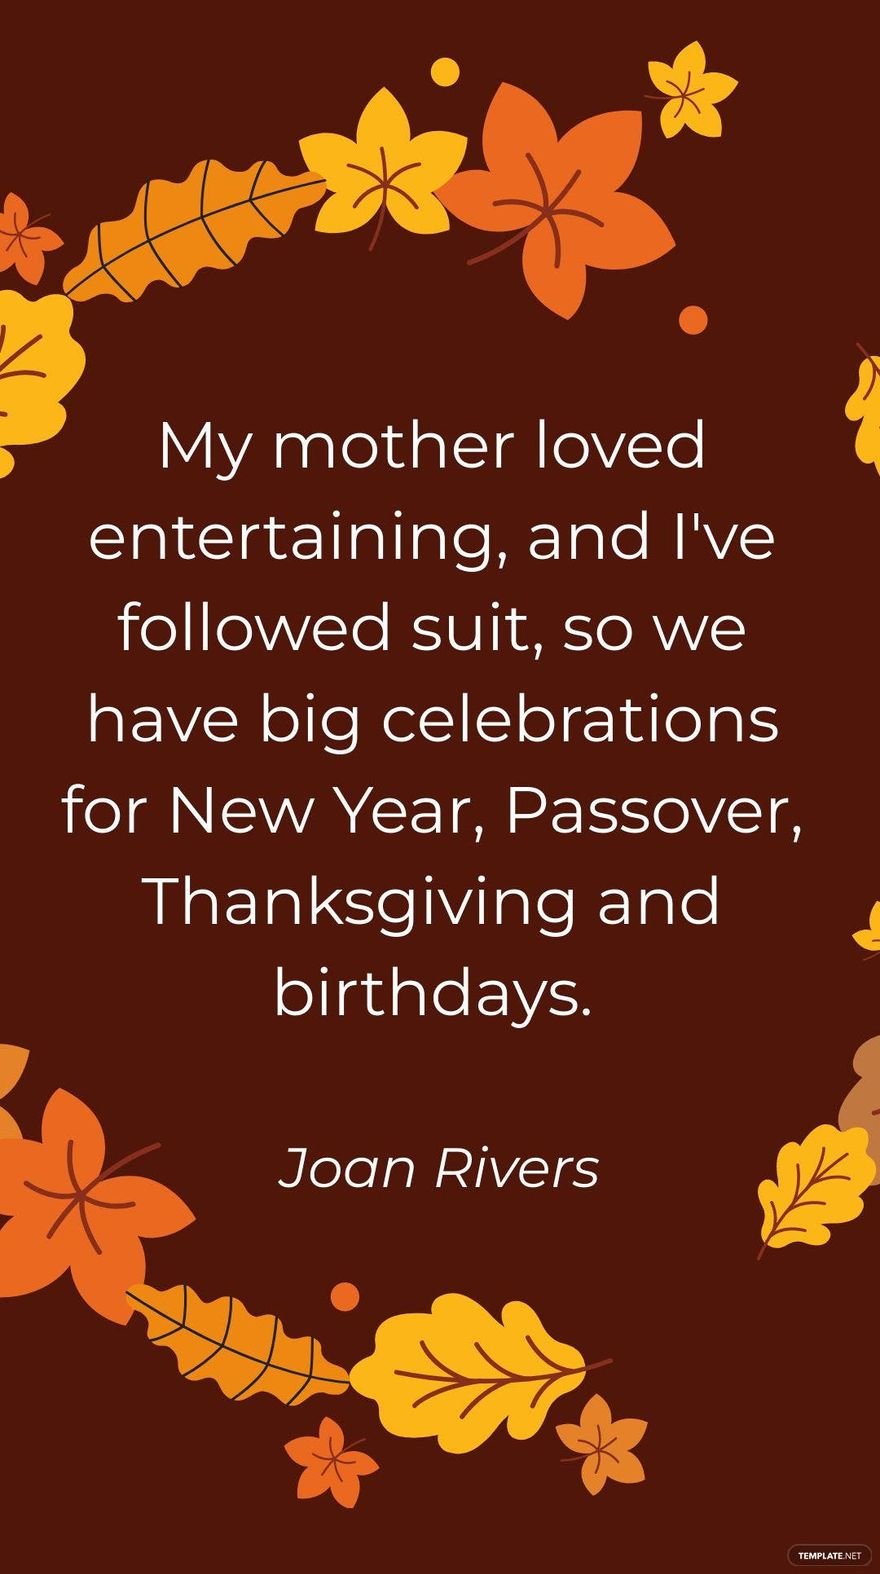 Free Joan Rivers - My mother loved entertaining, and I've followed suit, so we have big celebrations for New Year, Passover, Thanksgiving and birthdays. in JPG